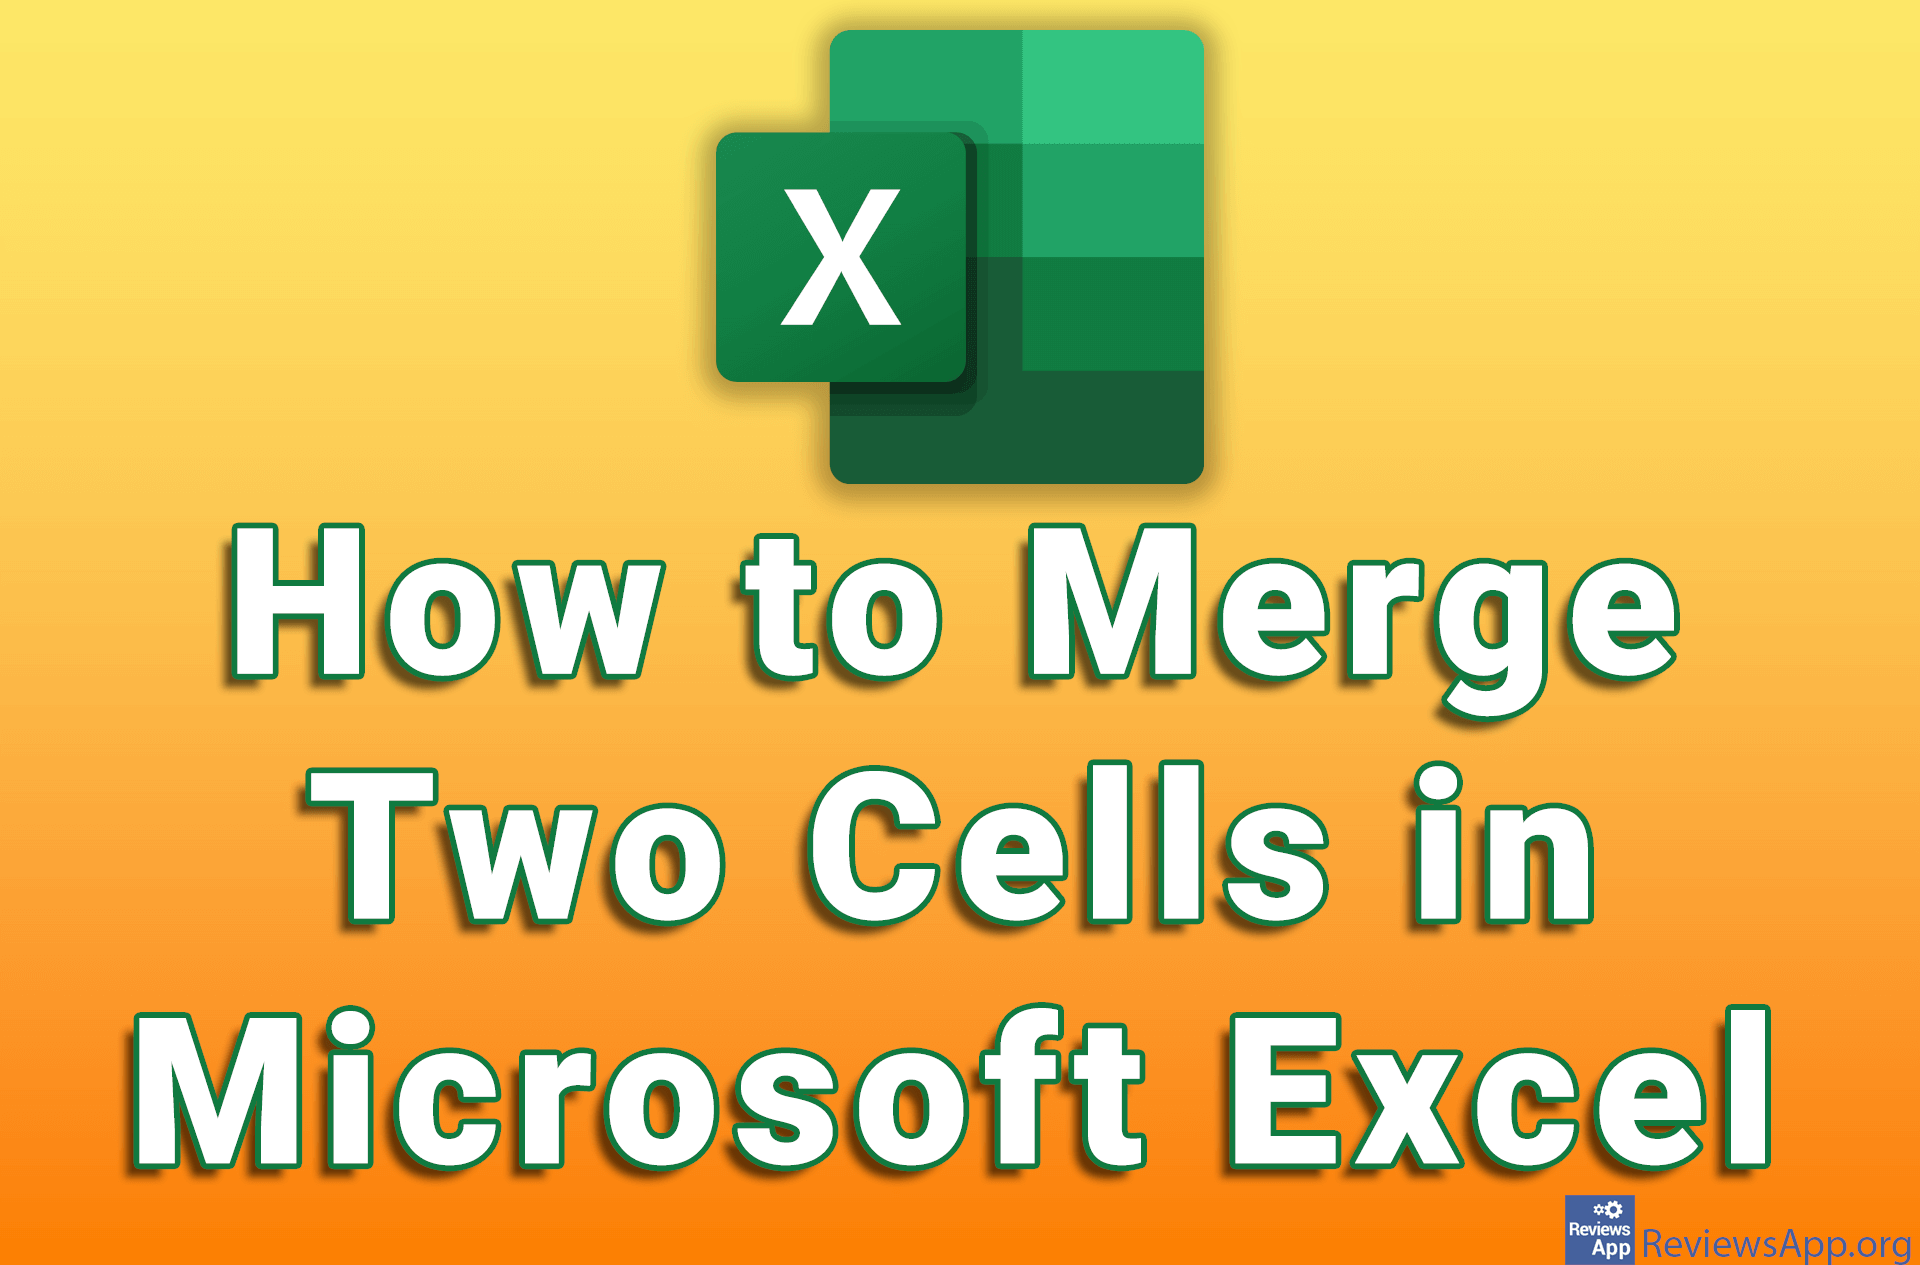 How to Merge Two Cells in Microsoft Excel